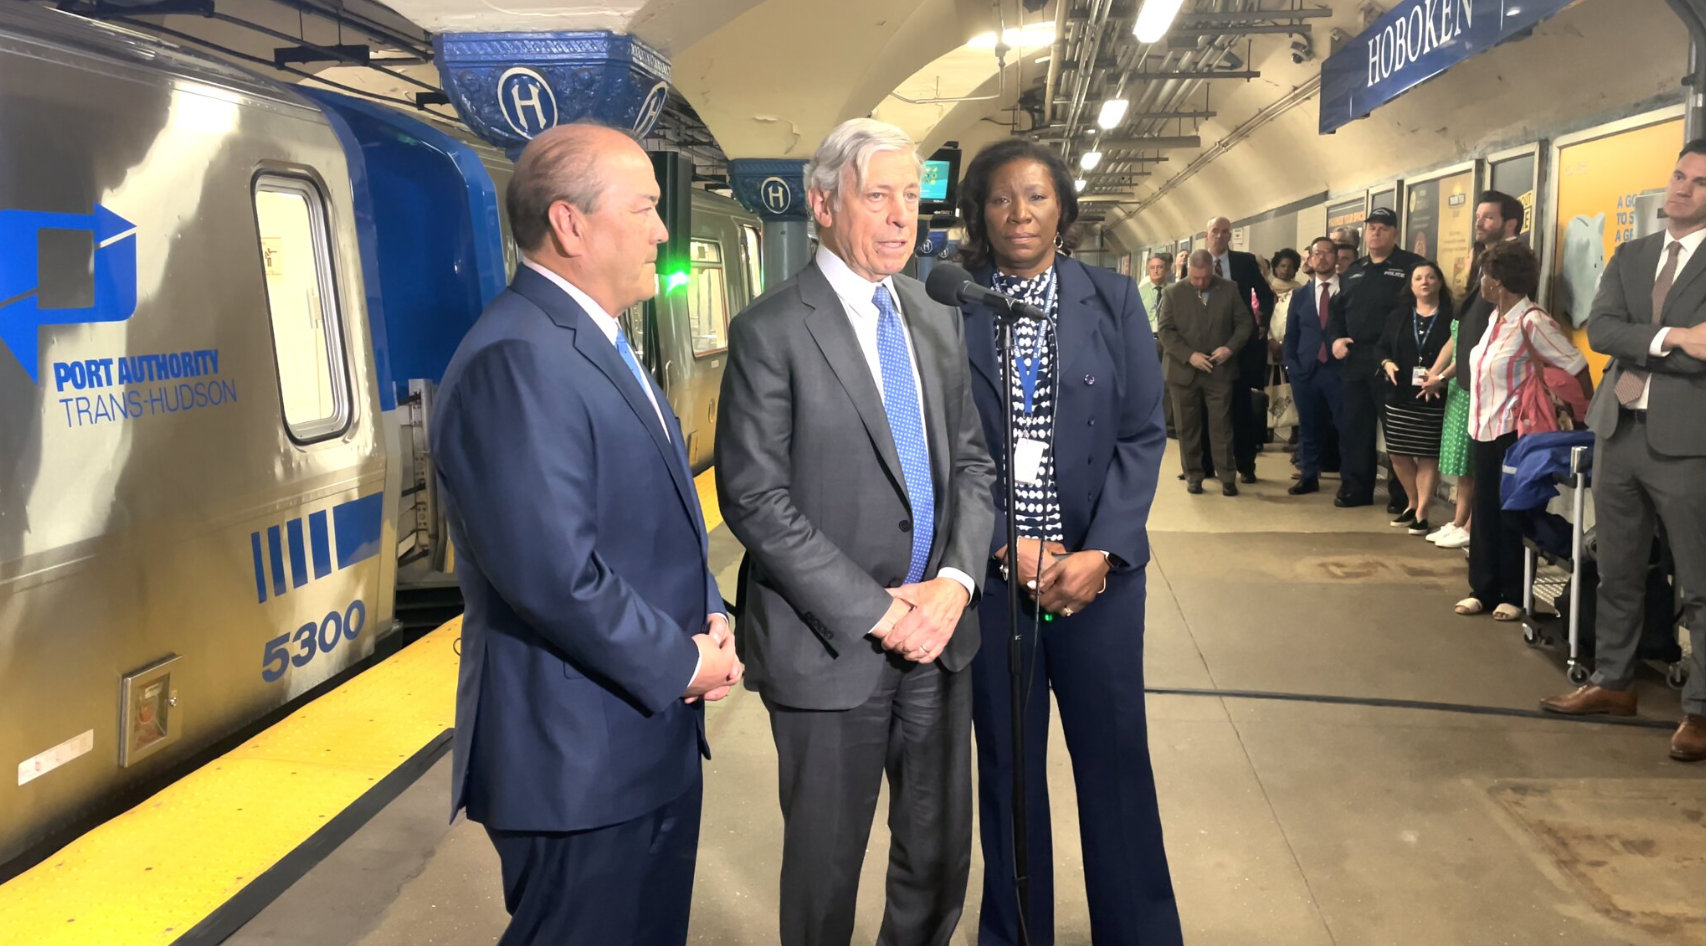 Port Authority of New York and New Jersey Chairman Kevin O’Toole (left), Executive Director Rick Cotton (center) and PATH Director Clarelle DeGraffe (right) unveiled a trainset with some of the new Kawasaki railcars at the PATH Hoboken (N.J.) station on April 13. (Credit: PANYNJ)